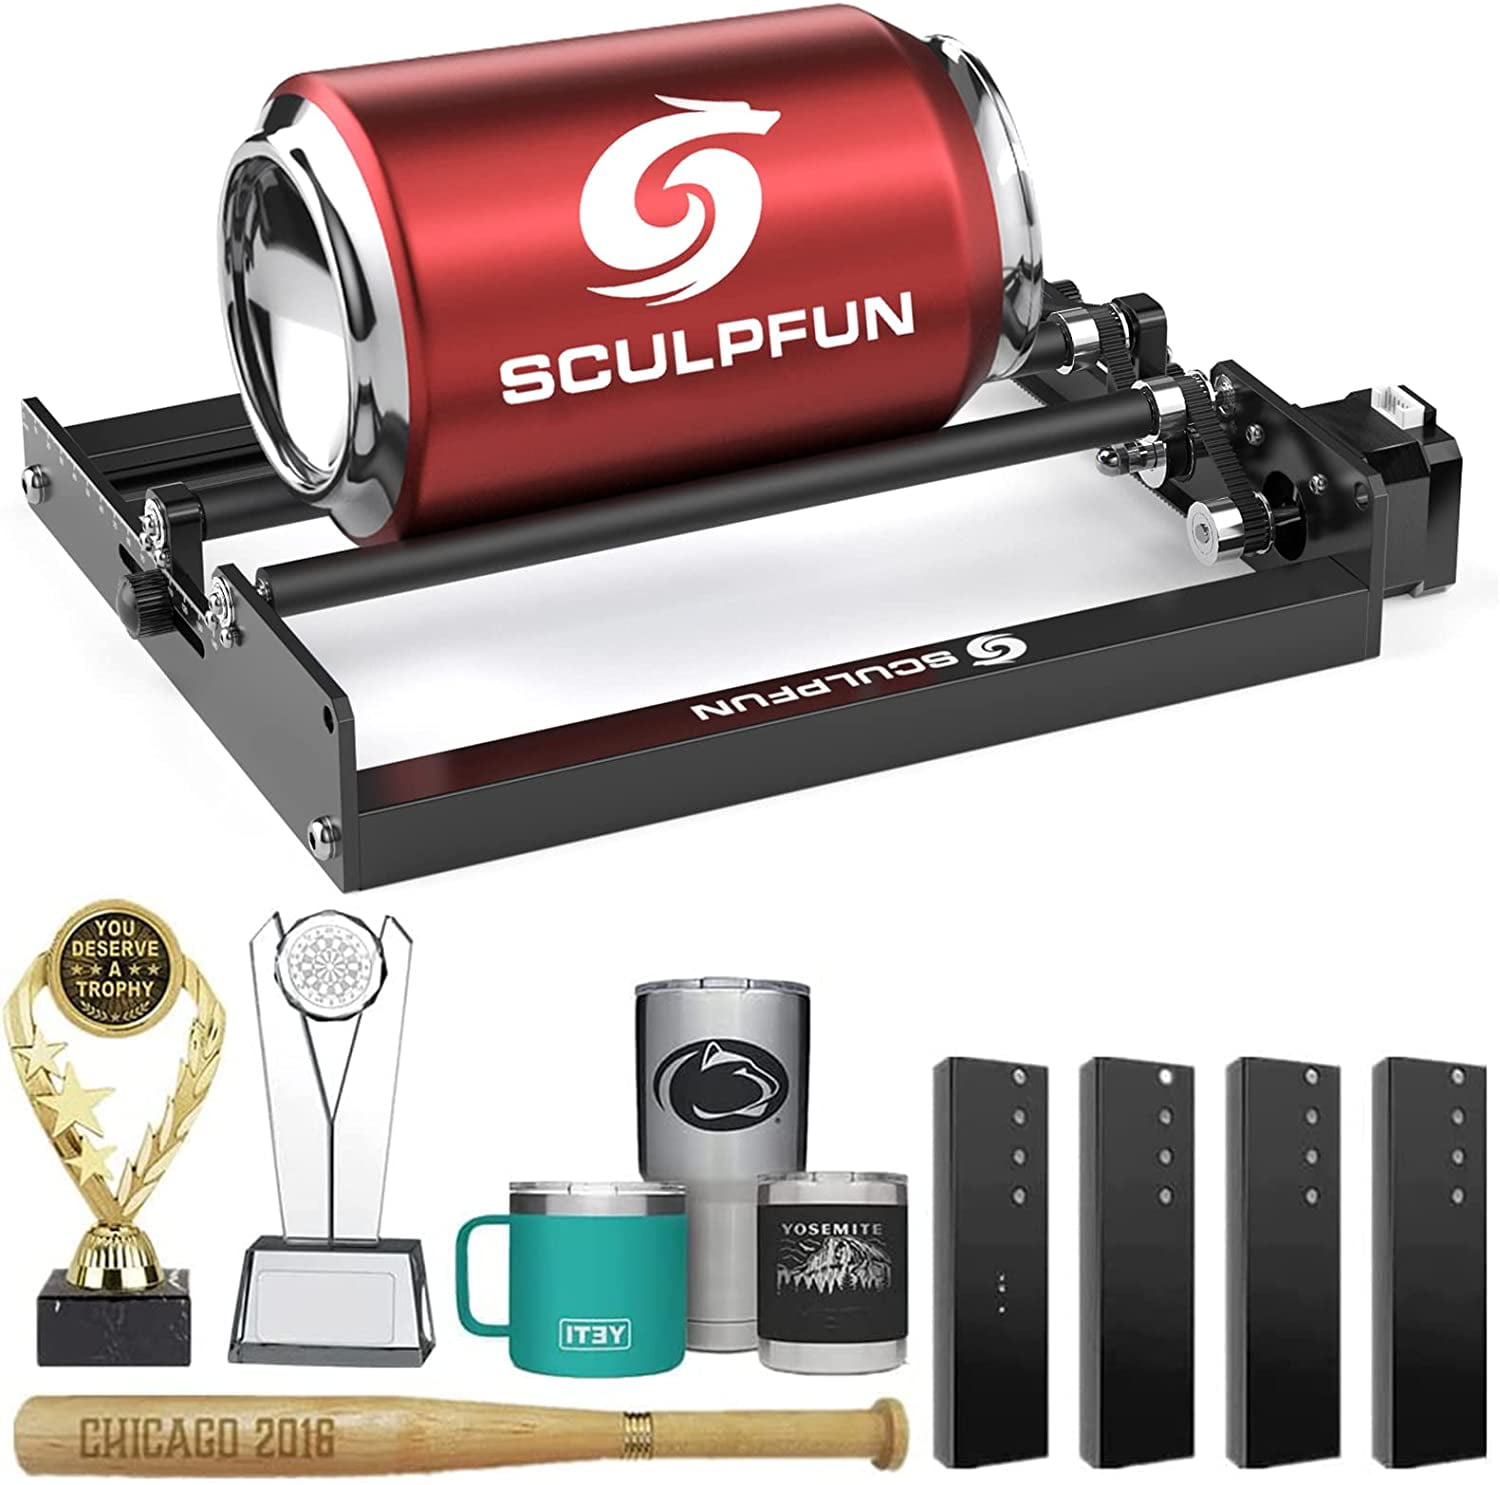 SCULPFUN S9 Laser Engraver with S9 Expansion Kit for Extension to 410 x  950mm, 90W Effect High Precision CNC Laser Cutter and Engraver Machine,  Deep